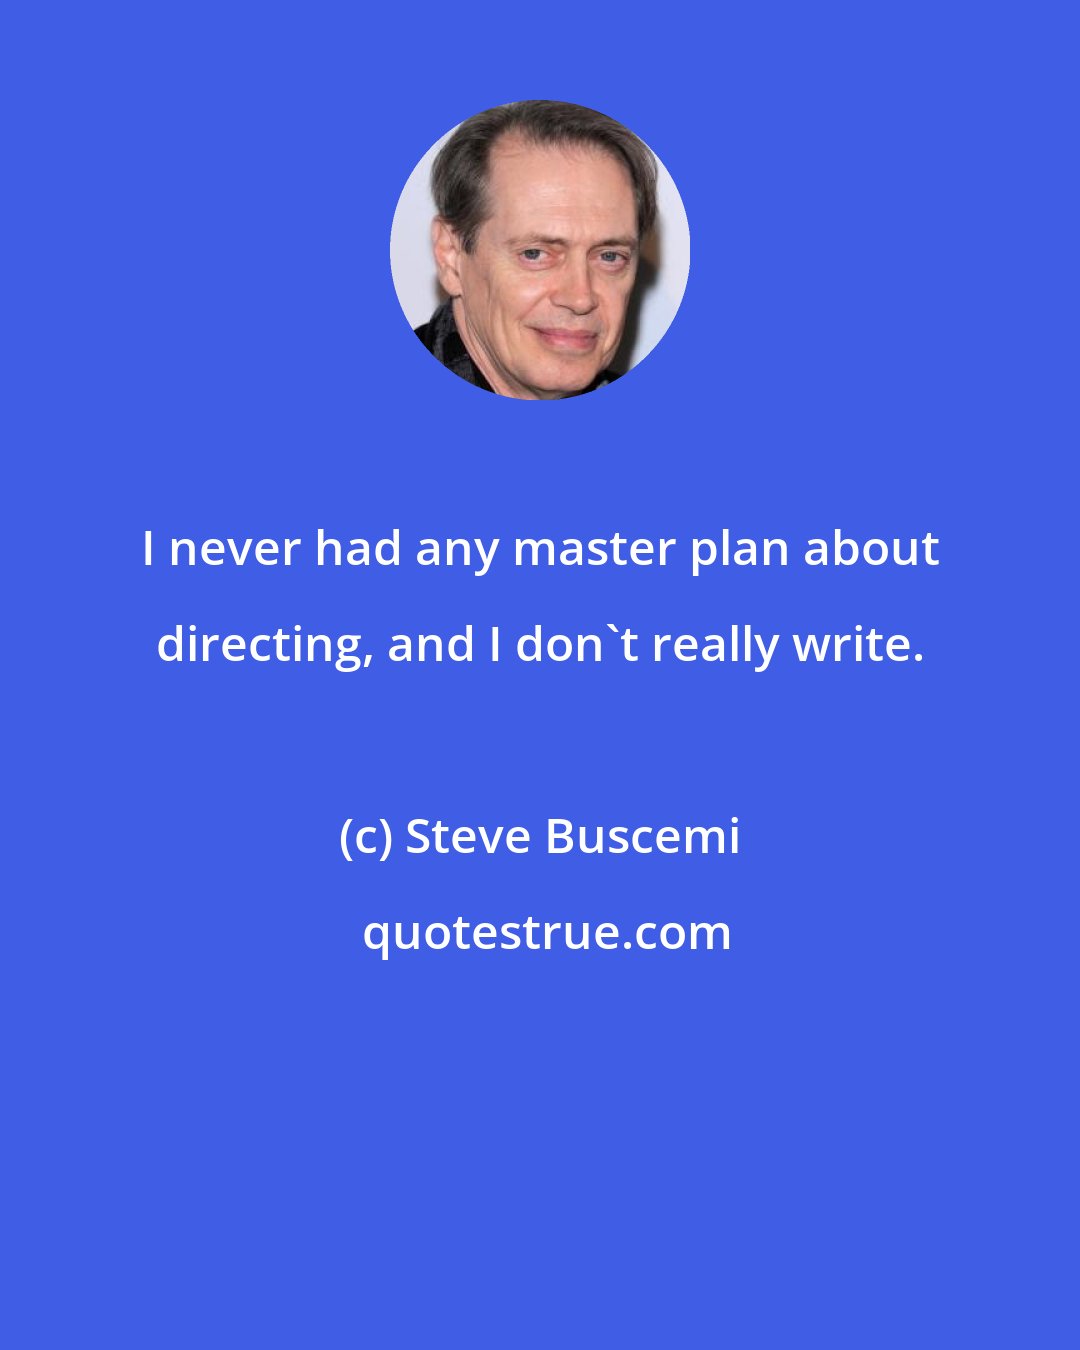 Steve Buscemi: I never had any master plan about directing, and I don't really write.